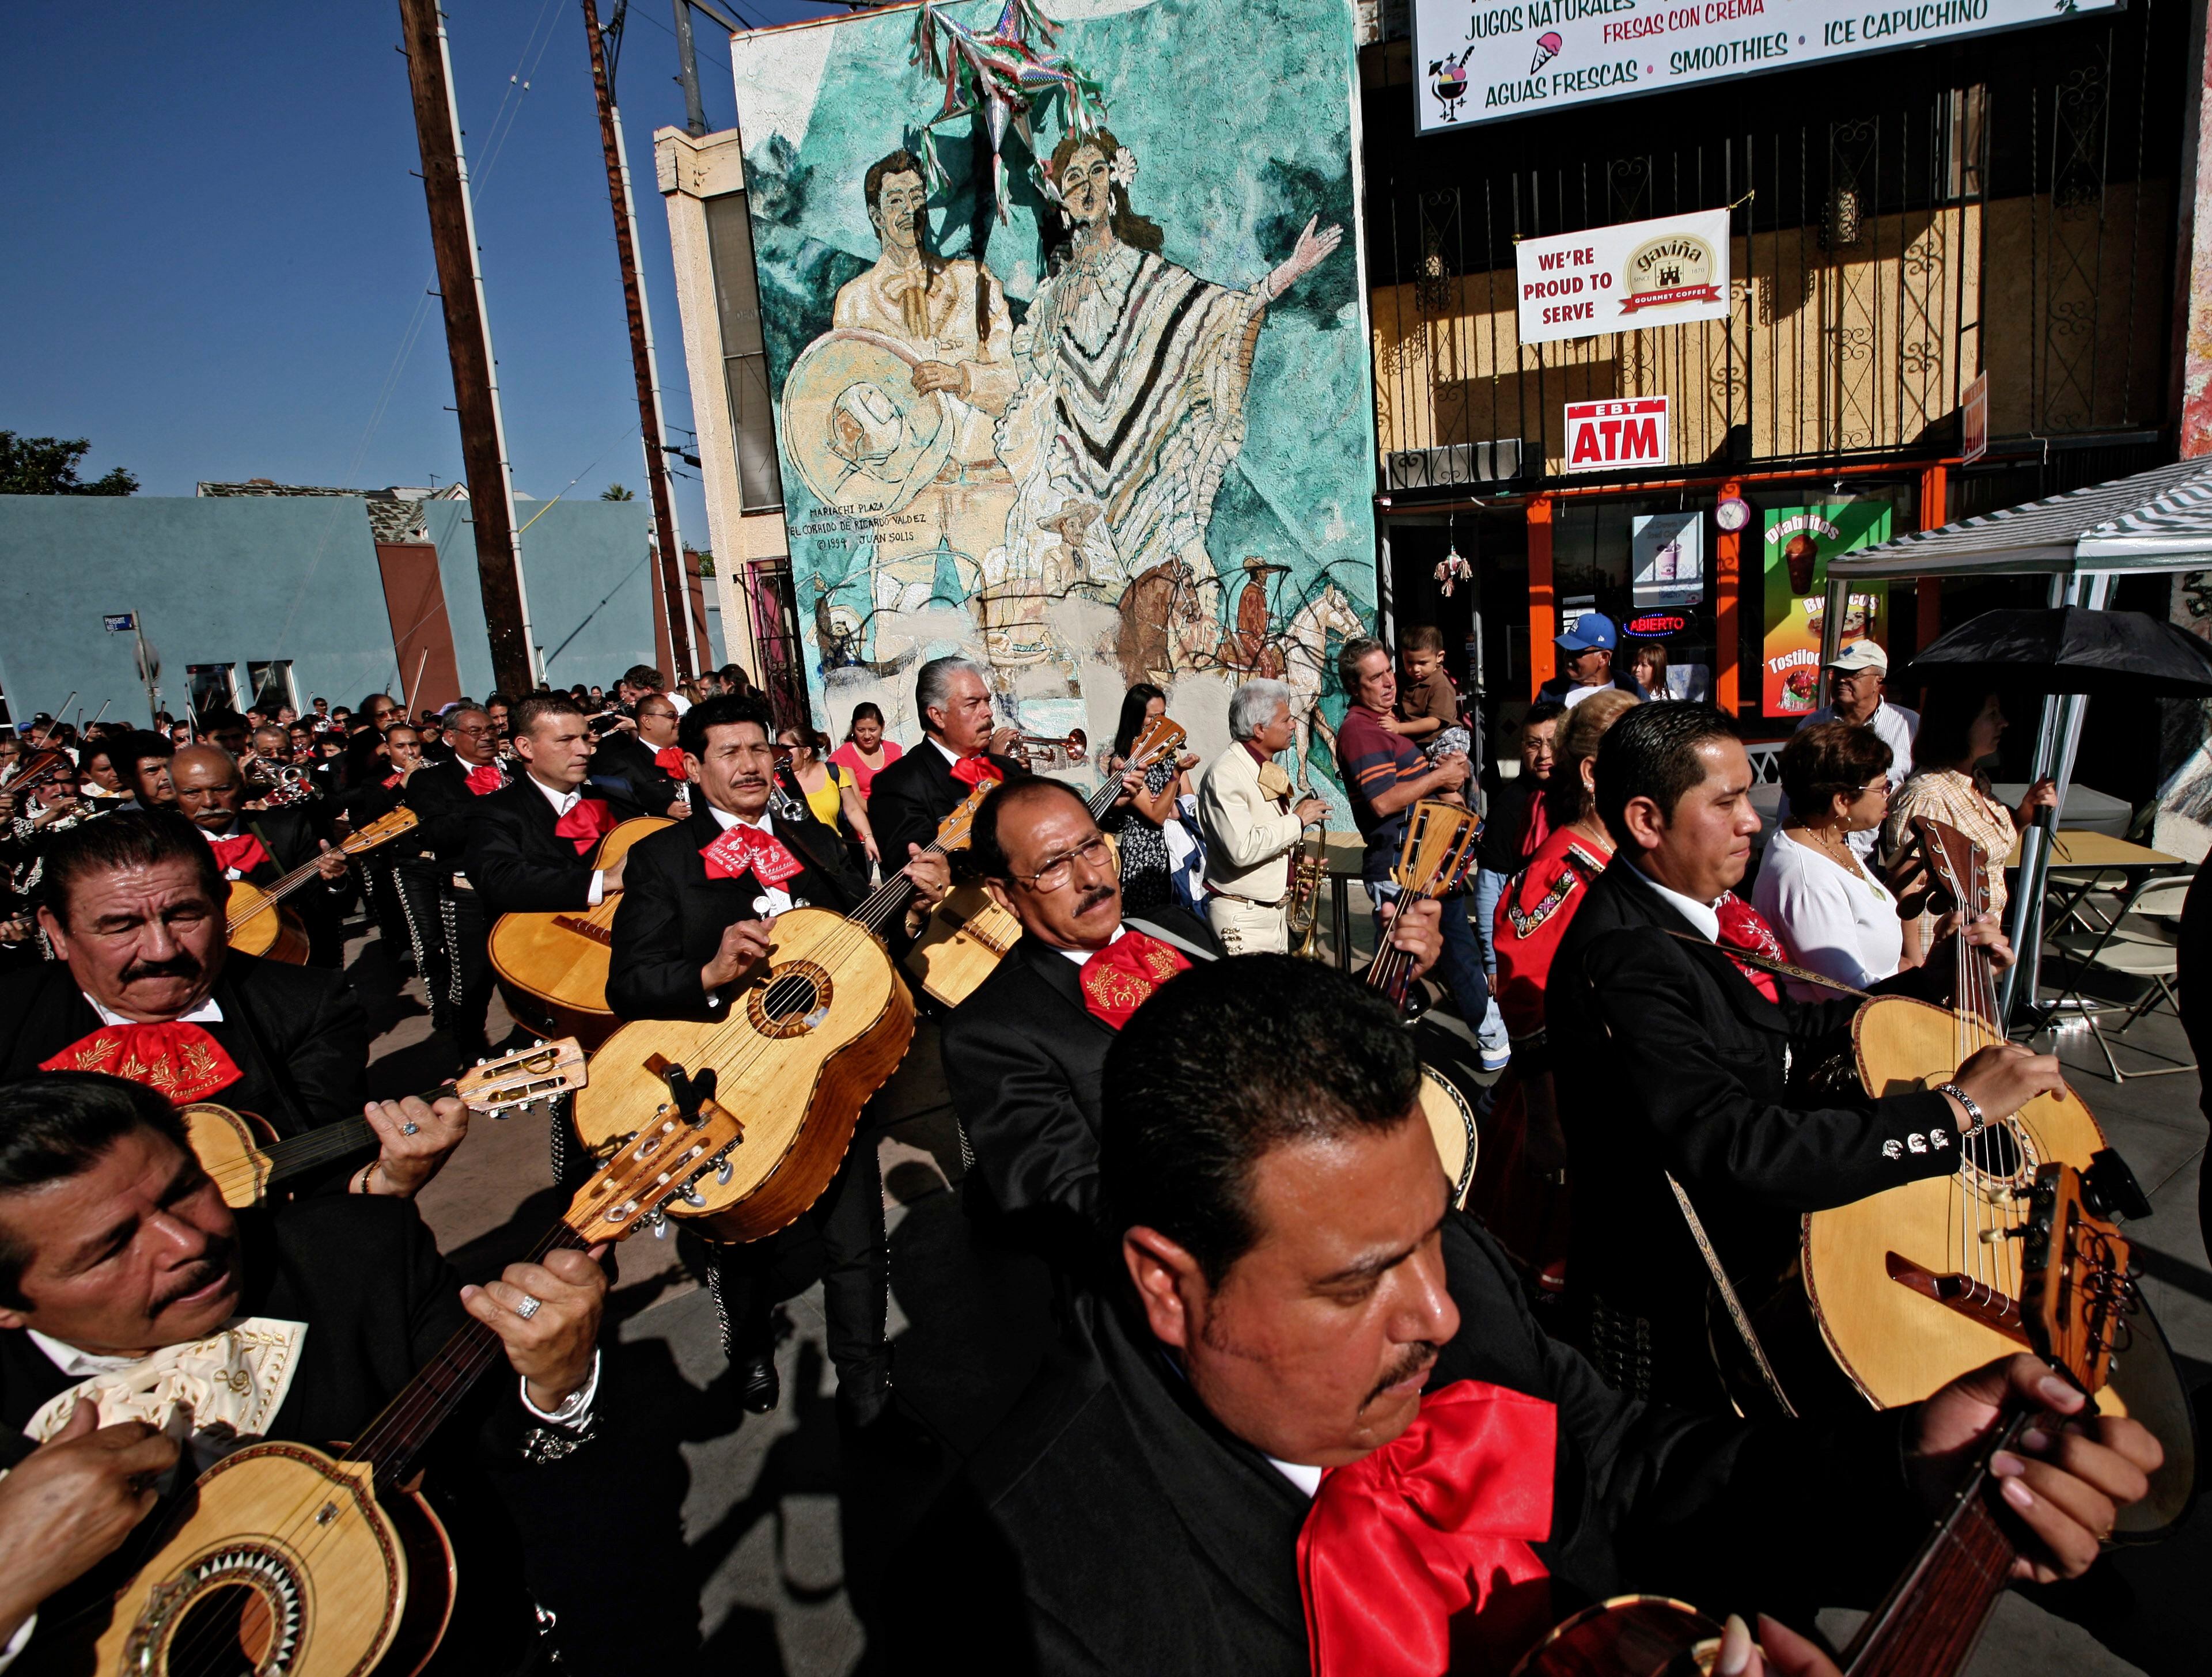 Mexican art of mariachi takes center stage on US stamps